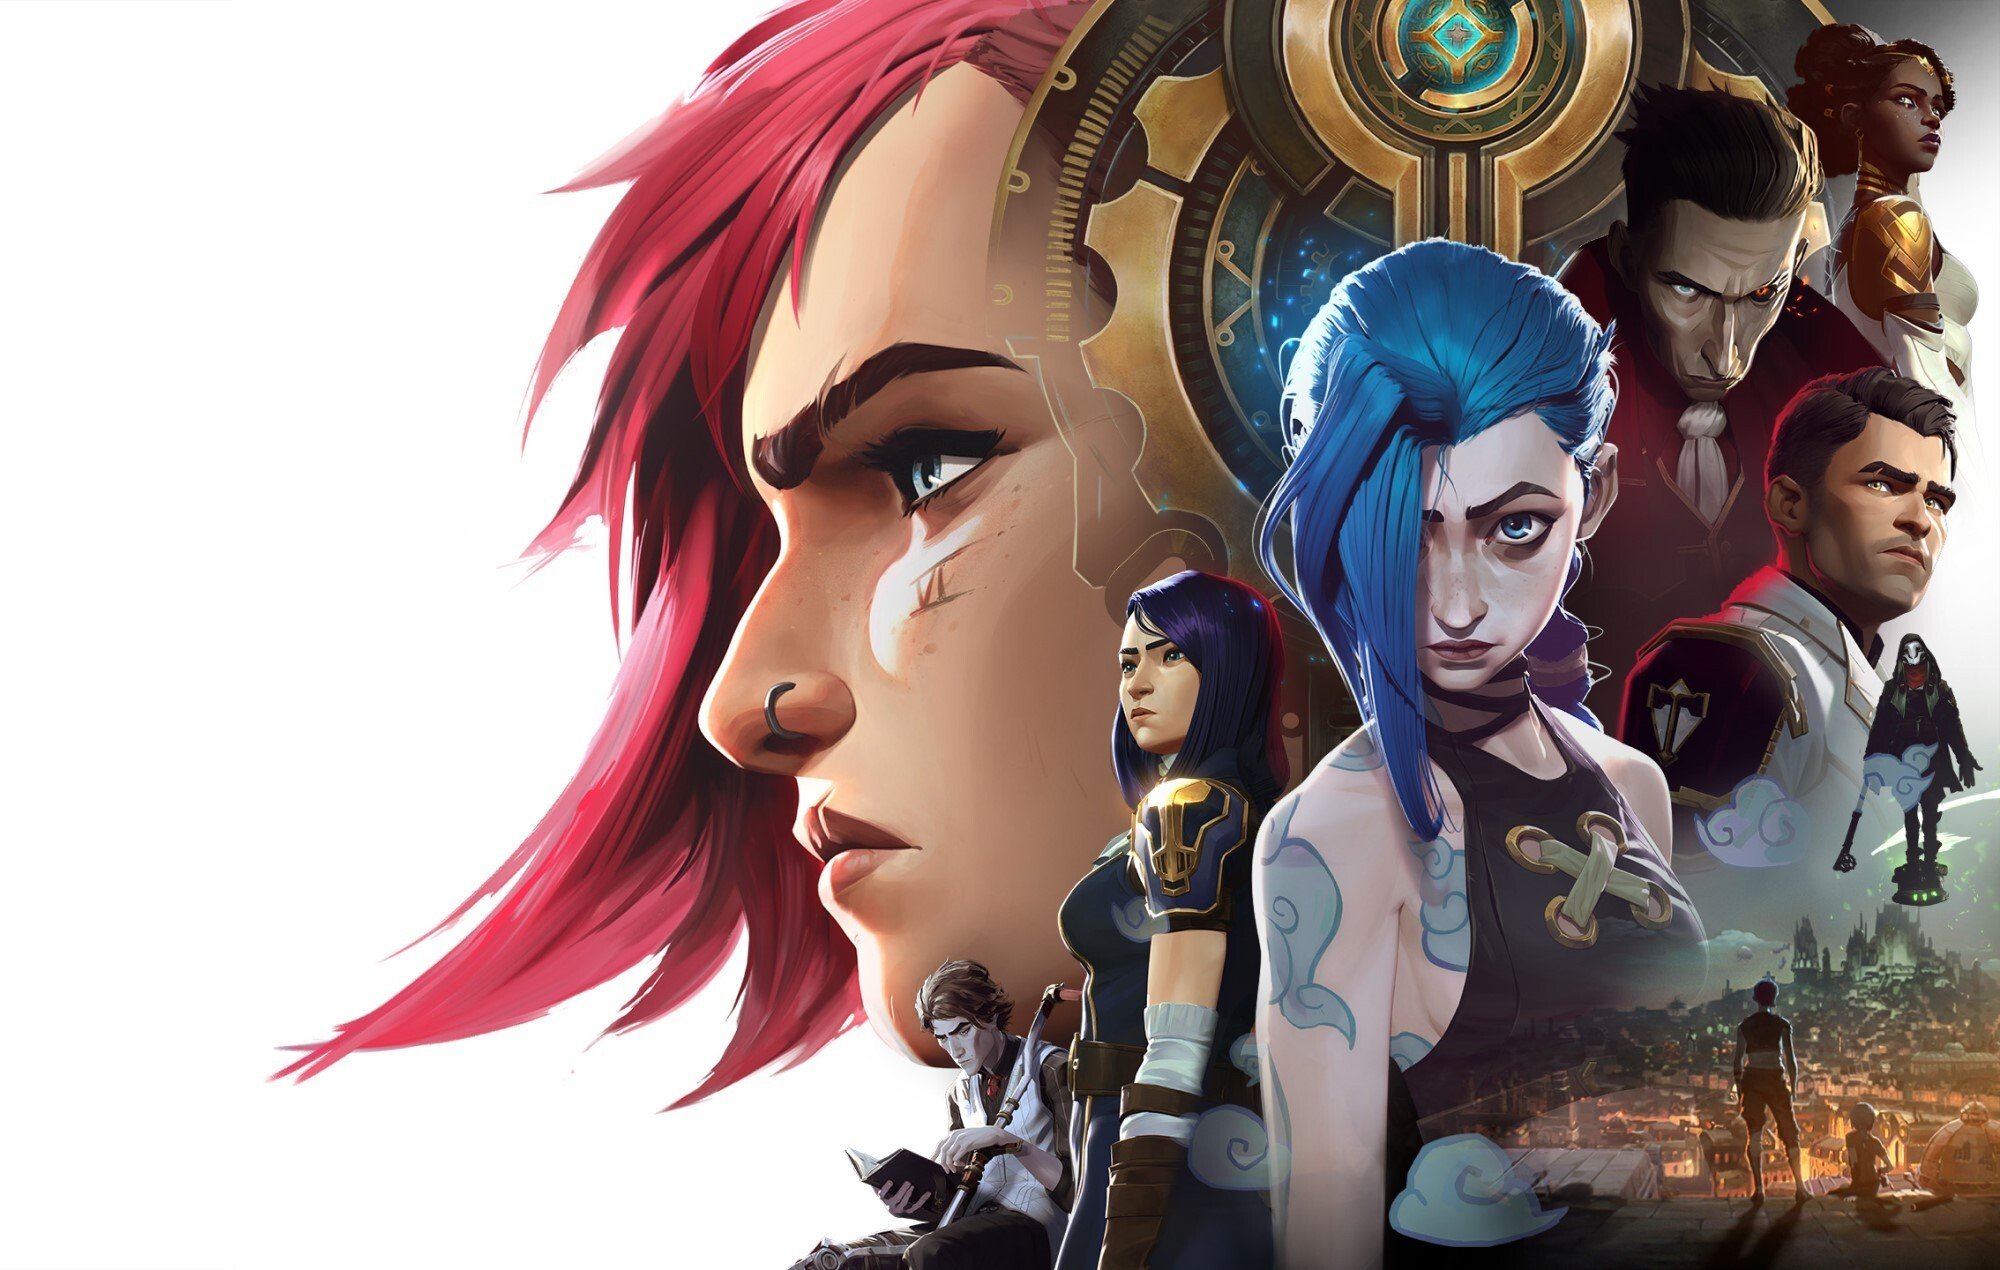 A promo image for Arcane, an animated spin-off of the video game League of Legends. Image: Netflix